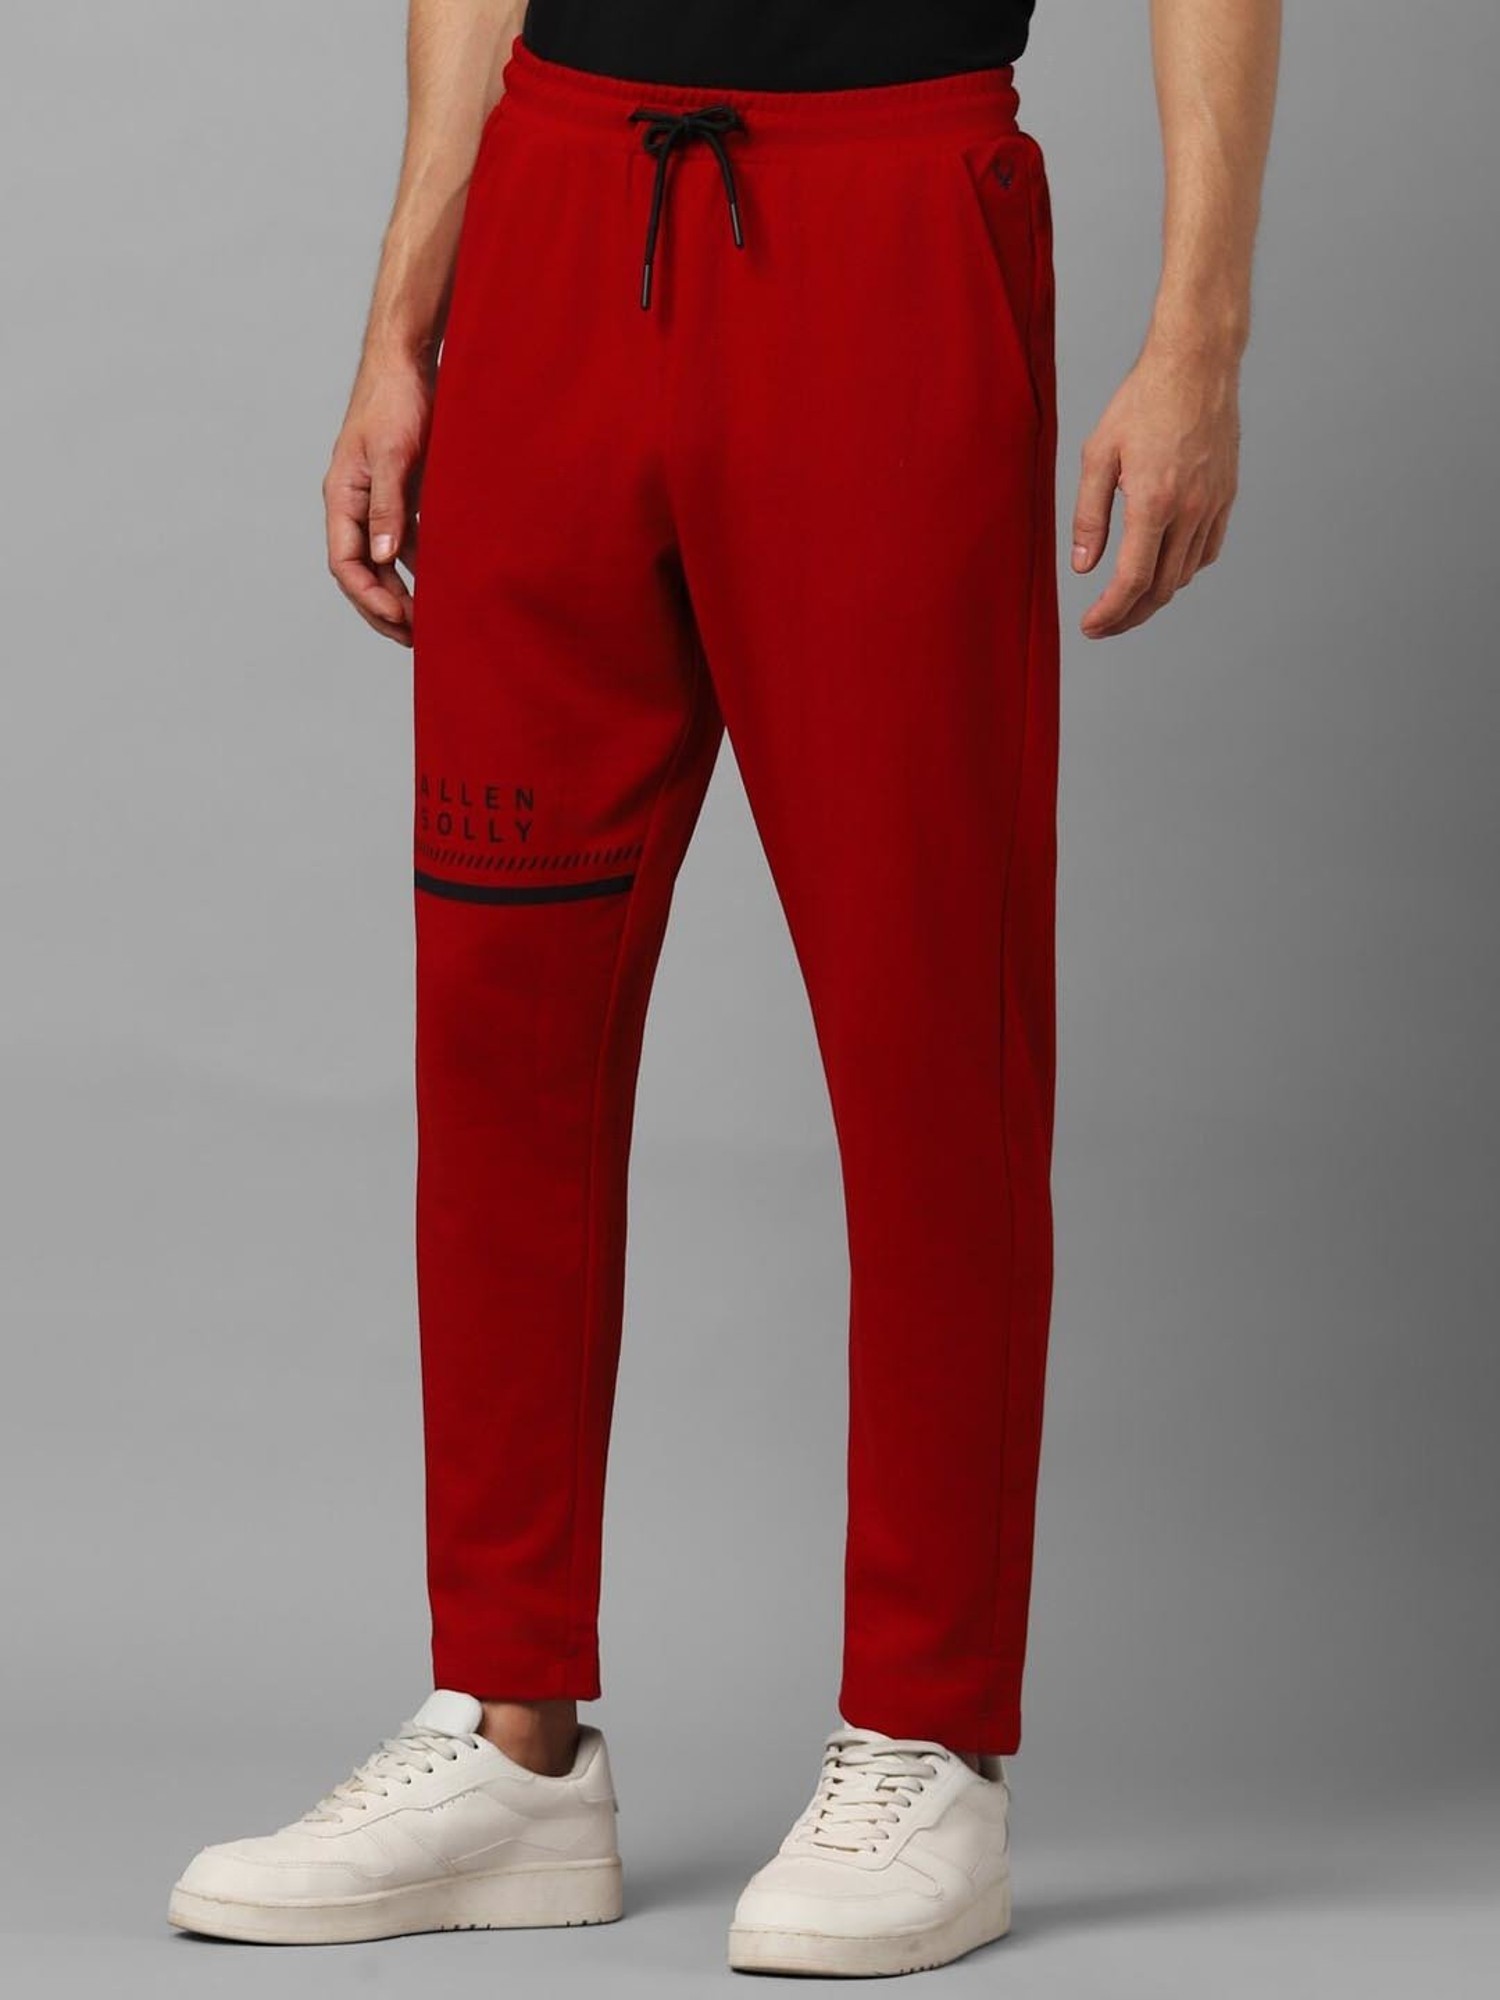 Buy ALLEN SOLLY Solid Polyester Slim Fit Men's Casual Trousers | Shoppers  Stop